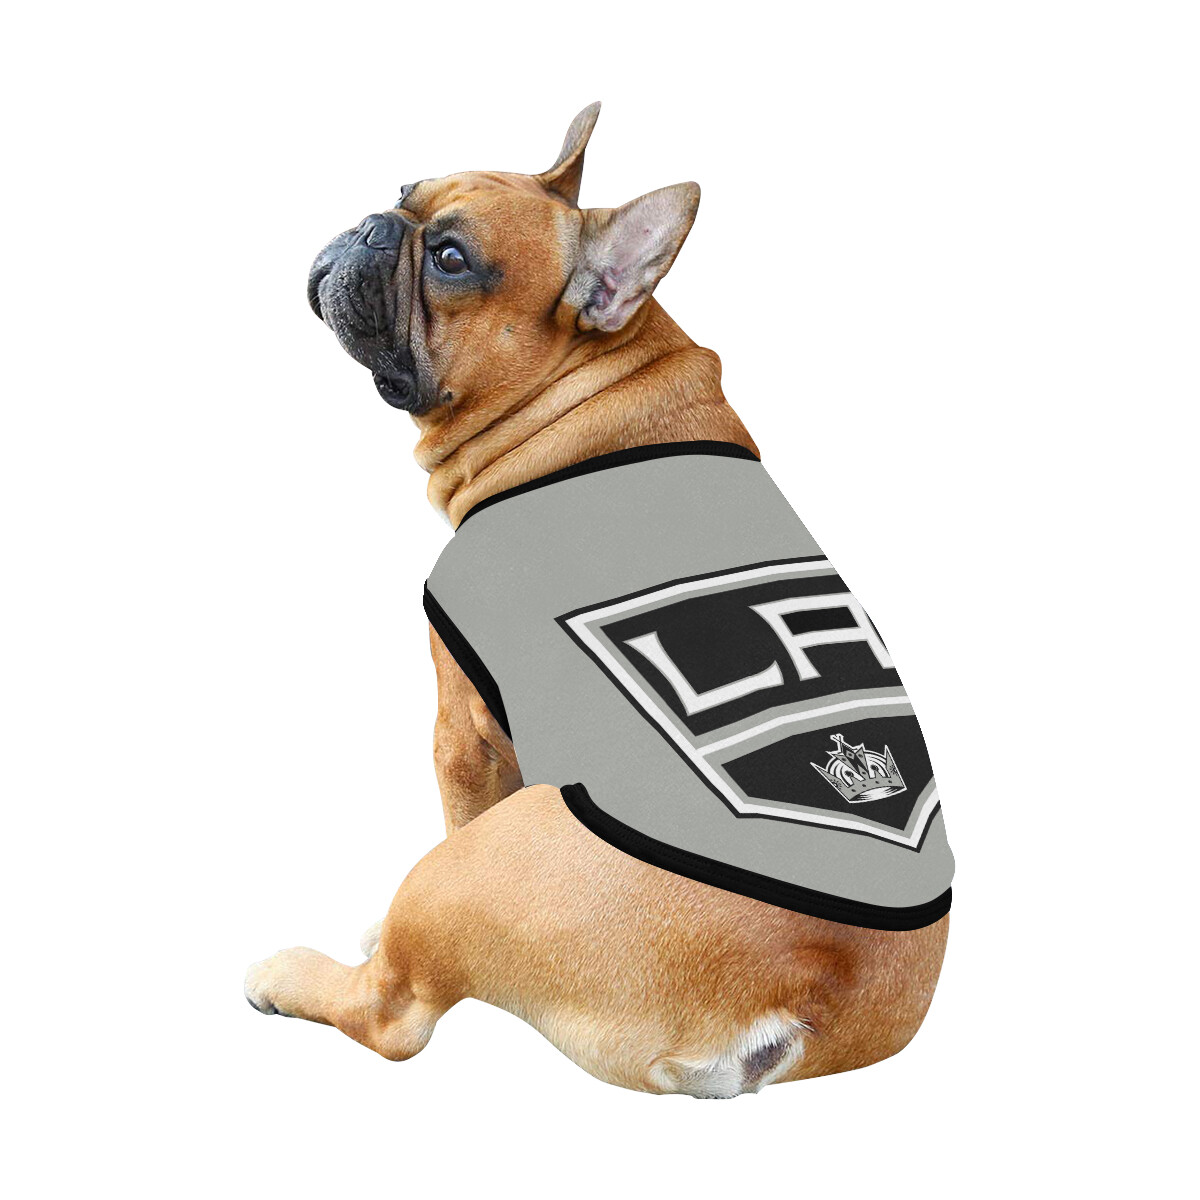 🐕 Los Angeles Kings Dog shirt, Dog Tank Top, Dog t-shirt, Dog clothes, Gifts, front back print, 7 sizes XS to 3XL, dog gifts, gray